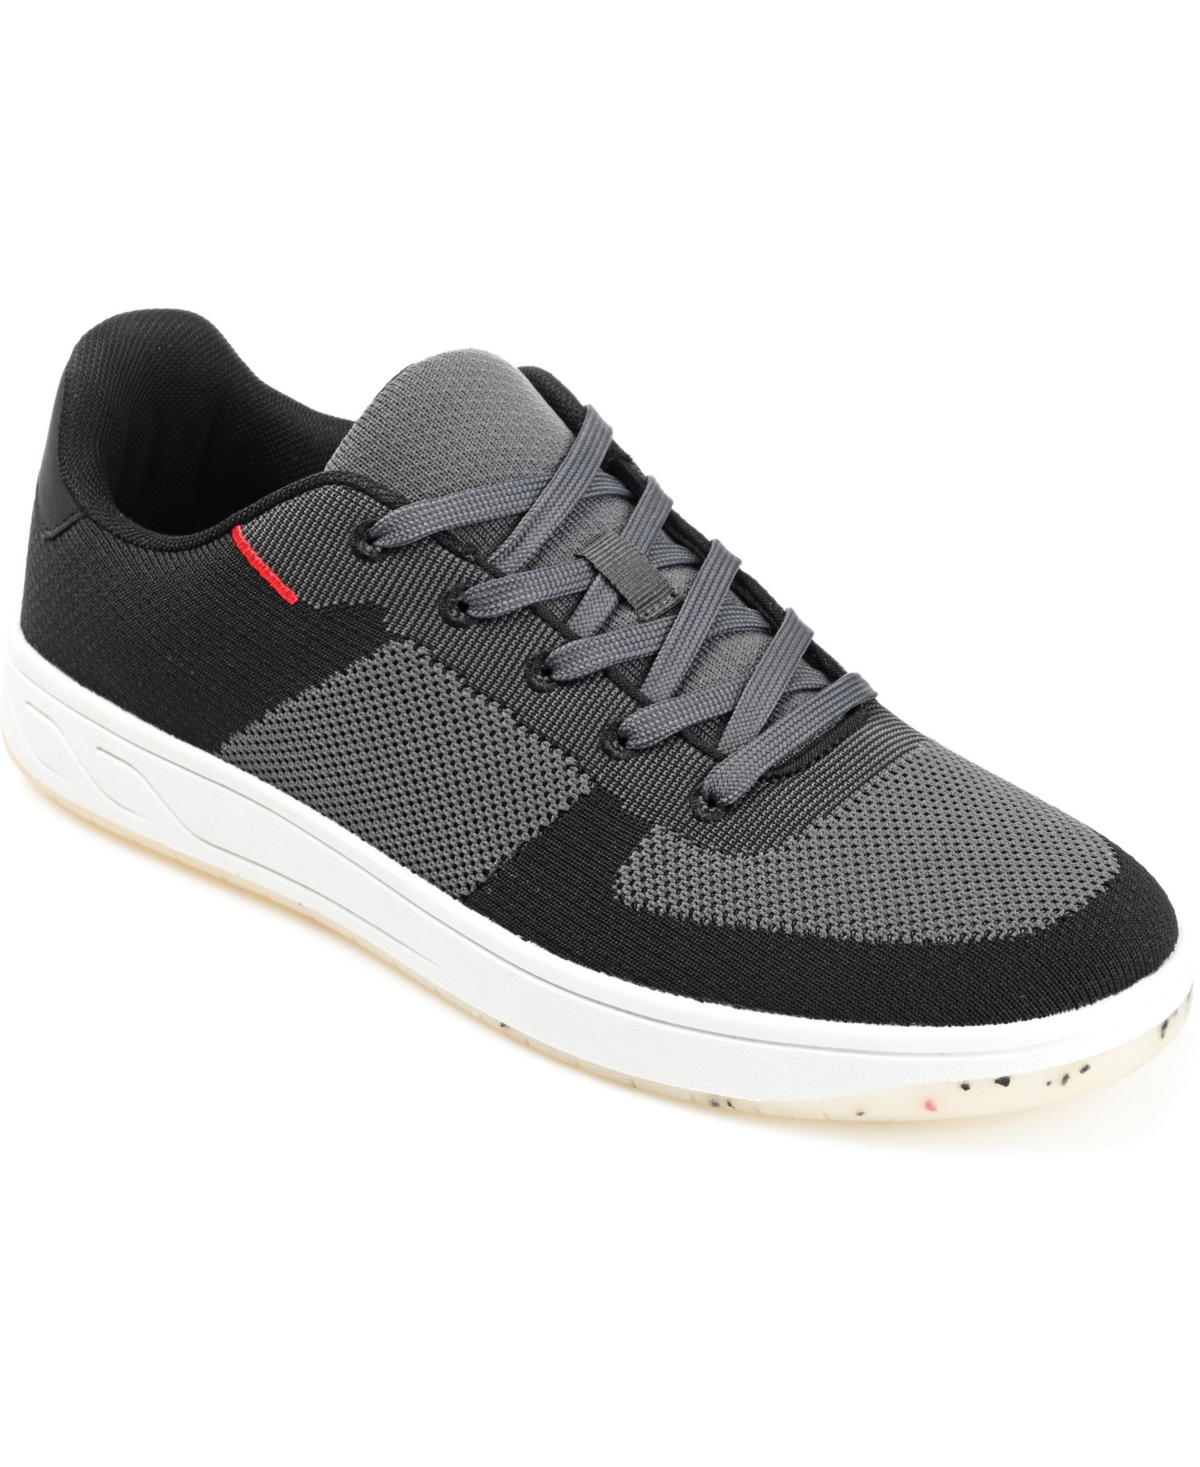 Men's Topher Knit Athleisure Sneakers - Gray